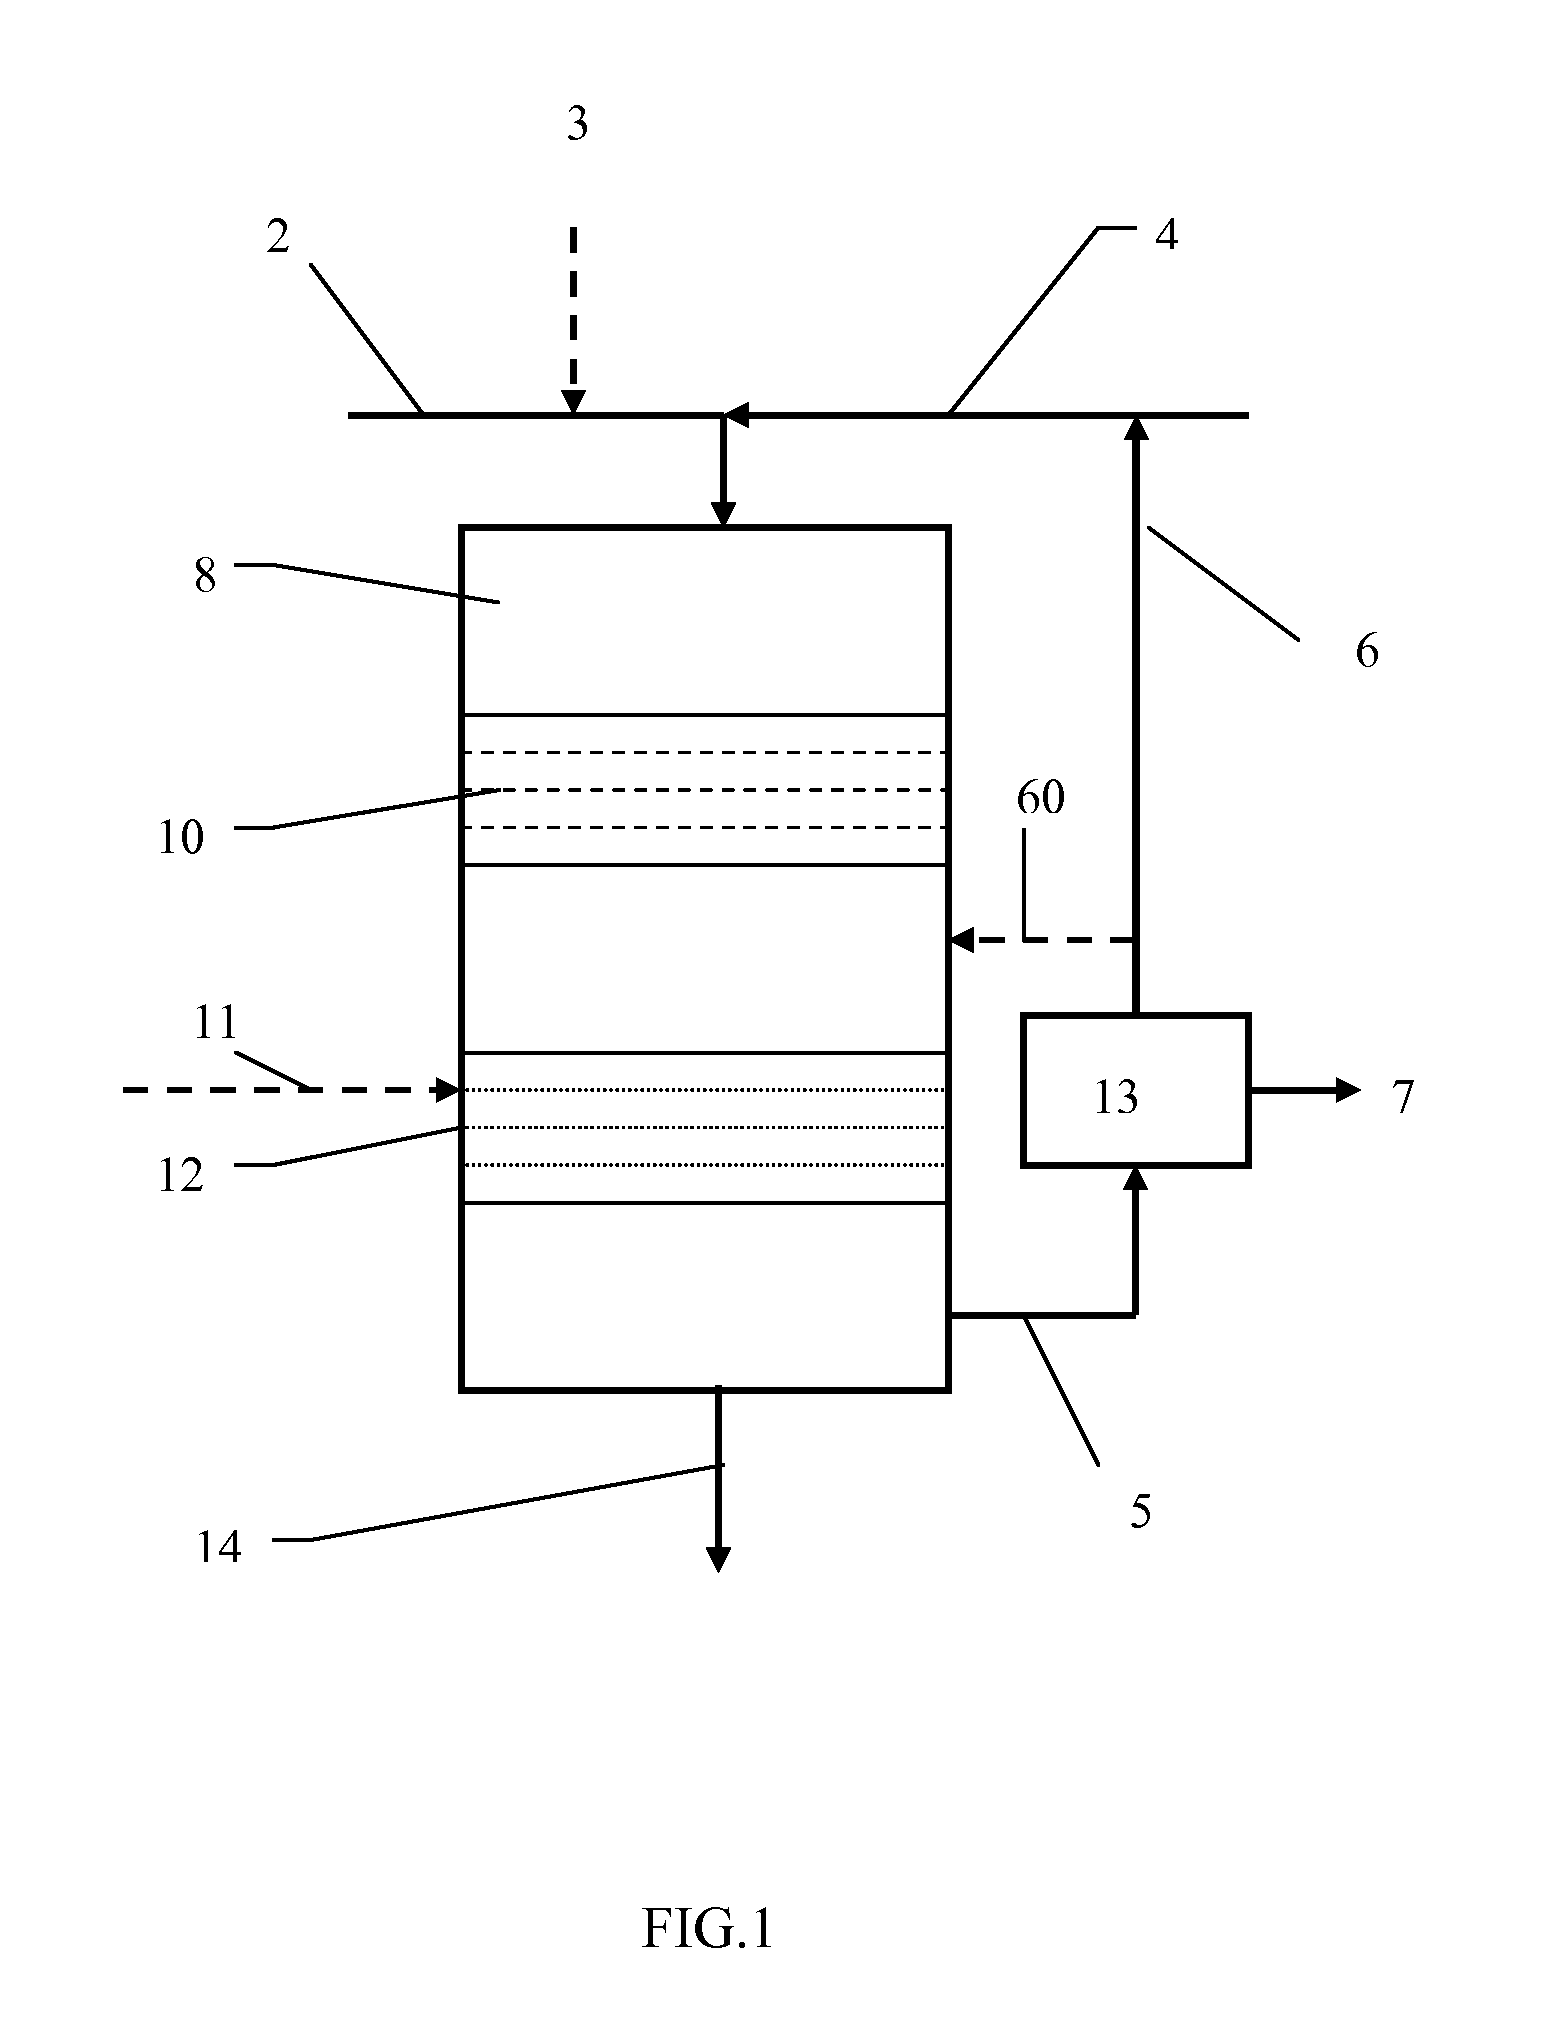 Process and apparatus for producing fuel from a biological origin through a single hydroprocessing step in the presence of a niw catalyst